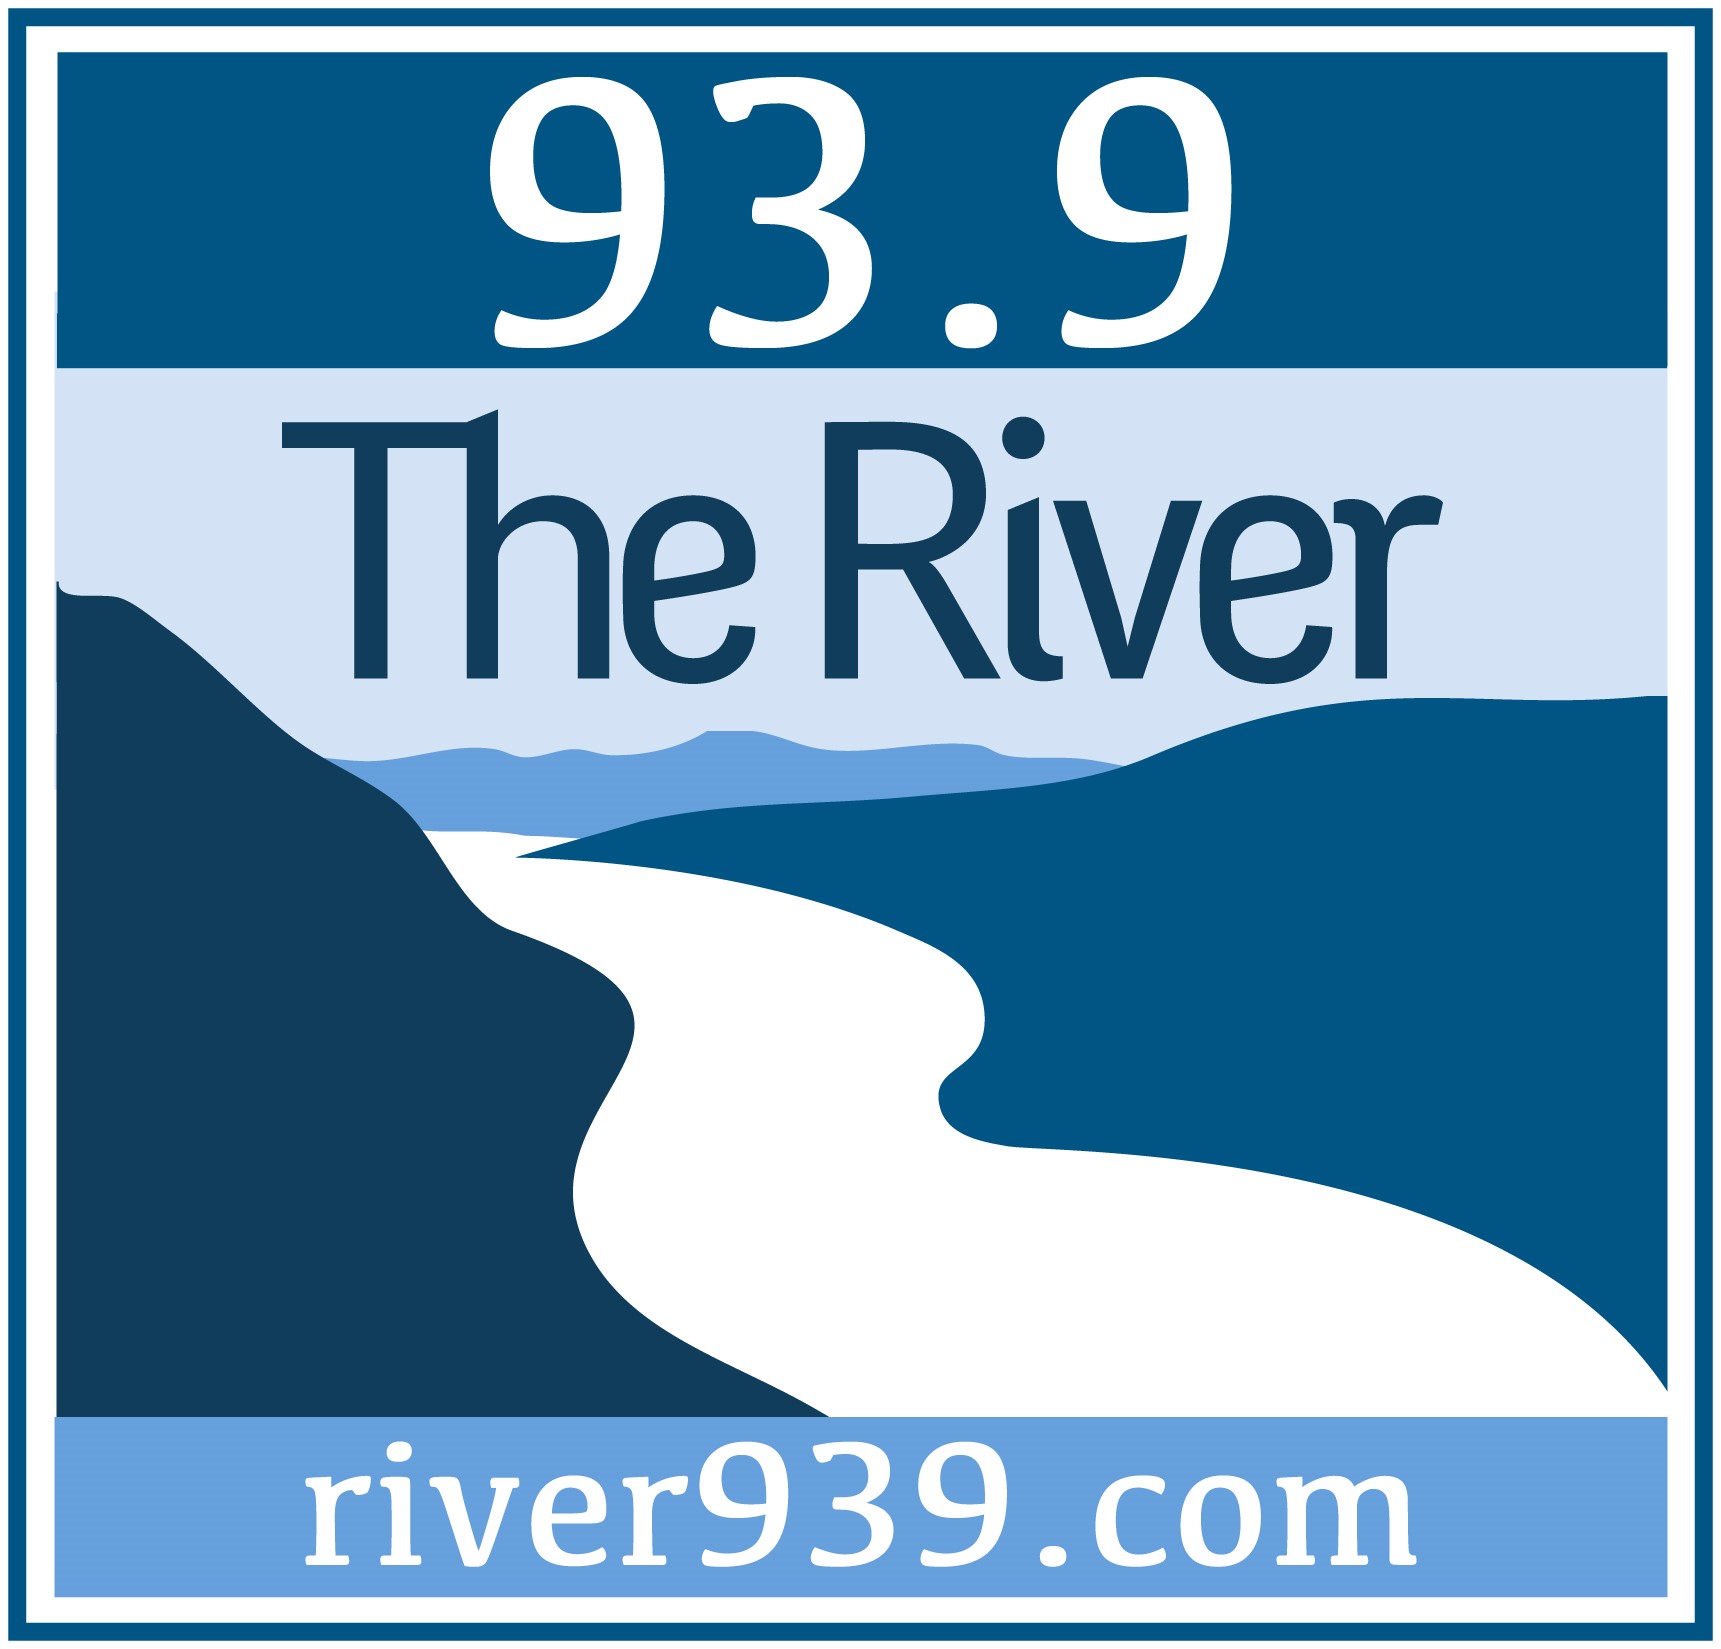 93.9 The River